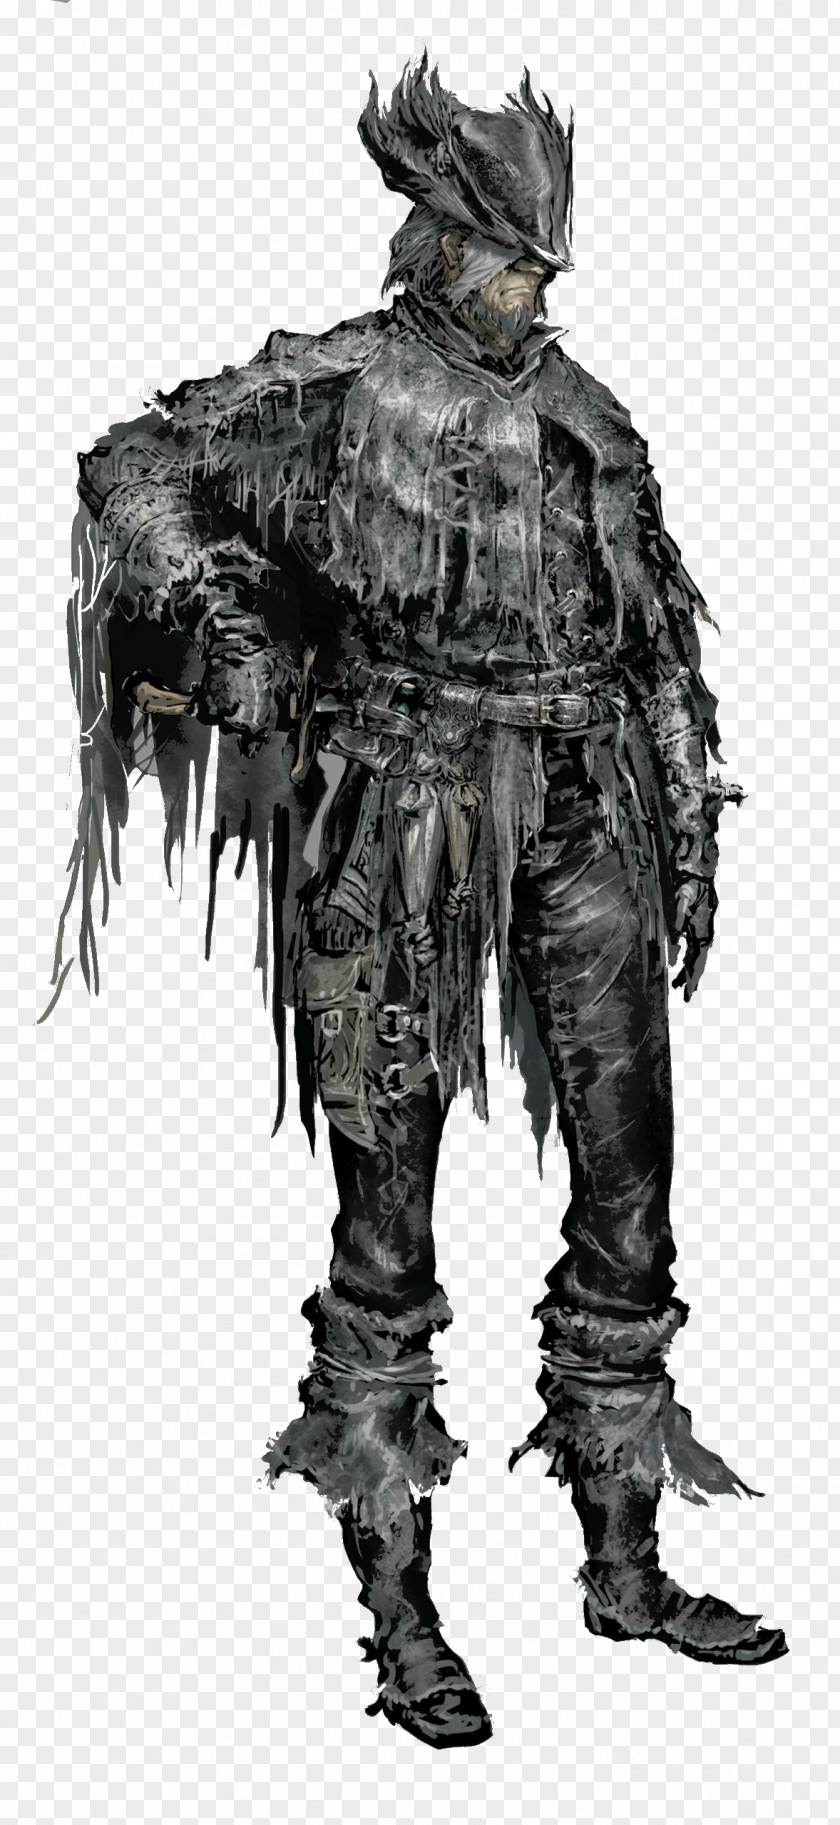 Bloodborne Bloodborne: The Old Hunters PlayStation 4 Hunting Art PNG